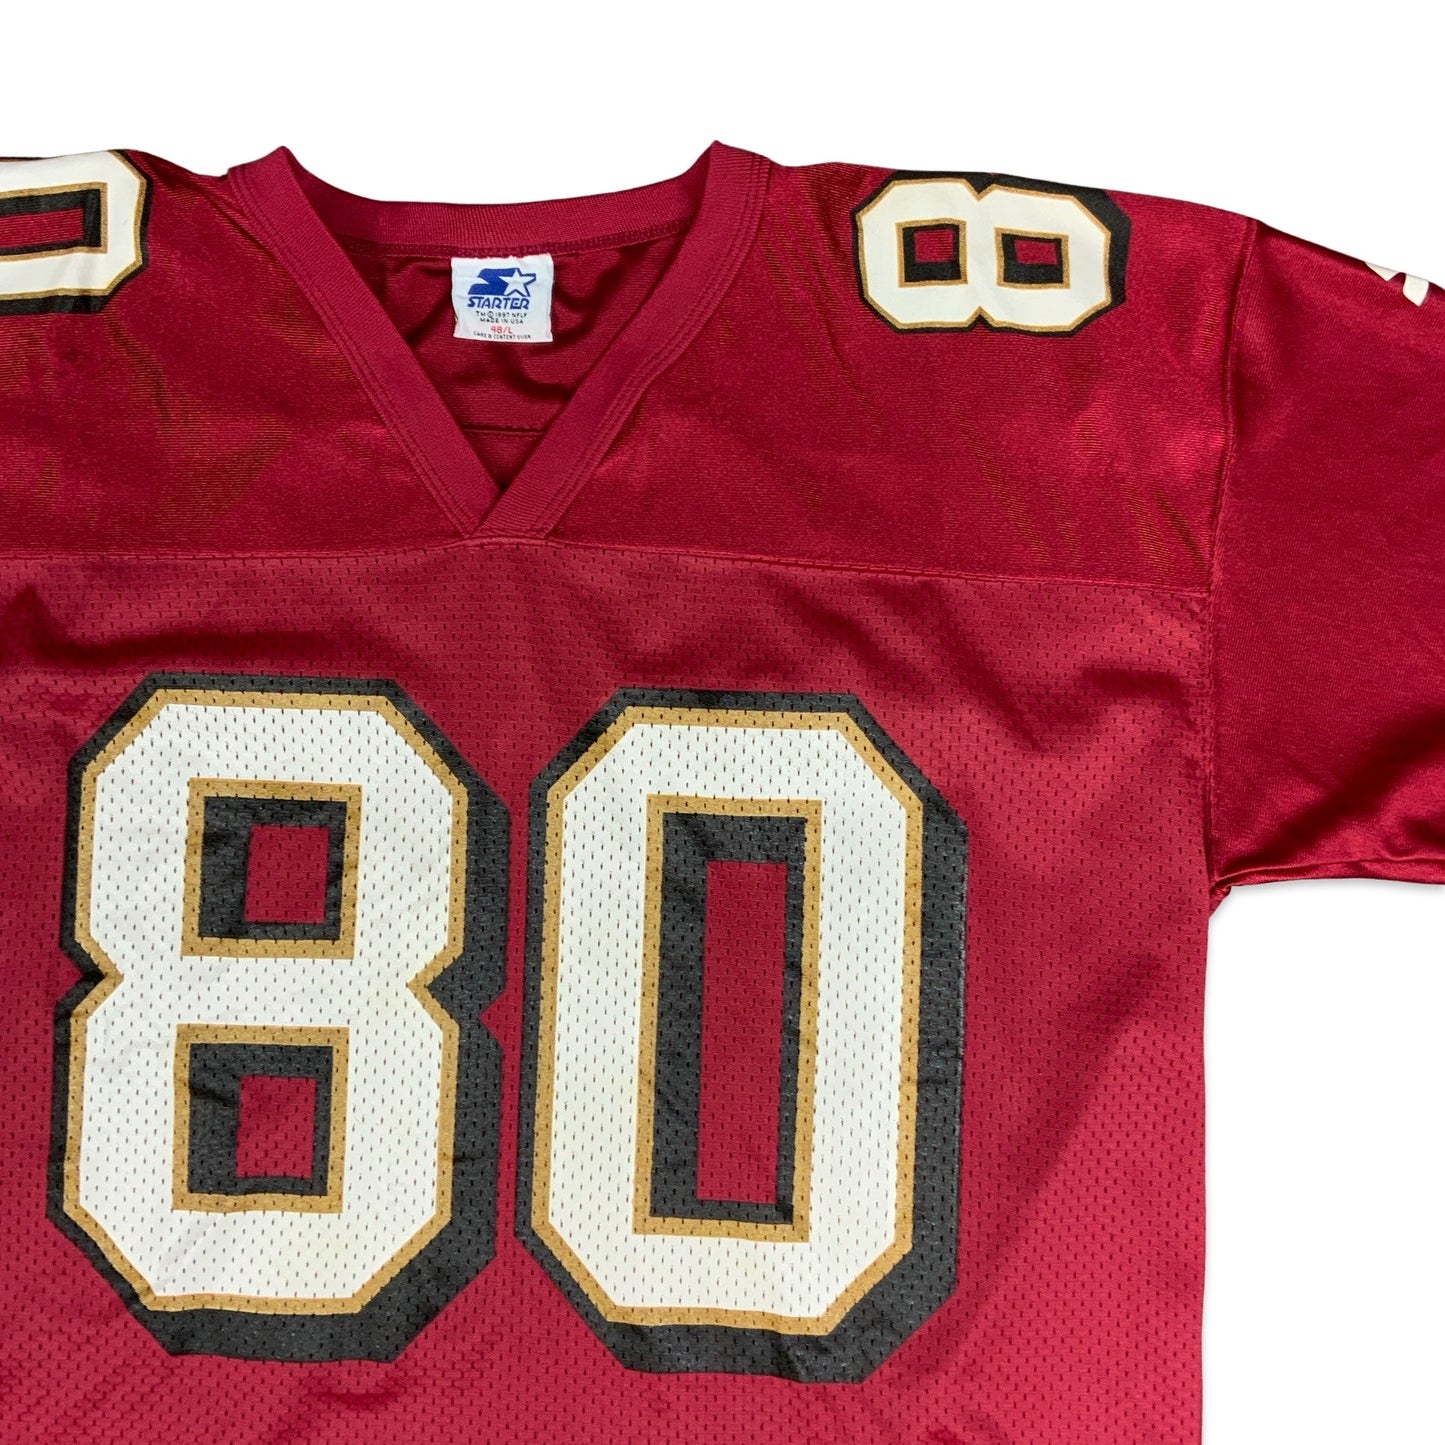 Vintage 90s San Francisco 49ers Jerry Rice Red Jersey M L